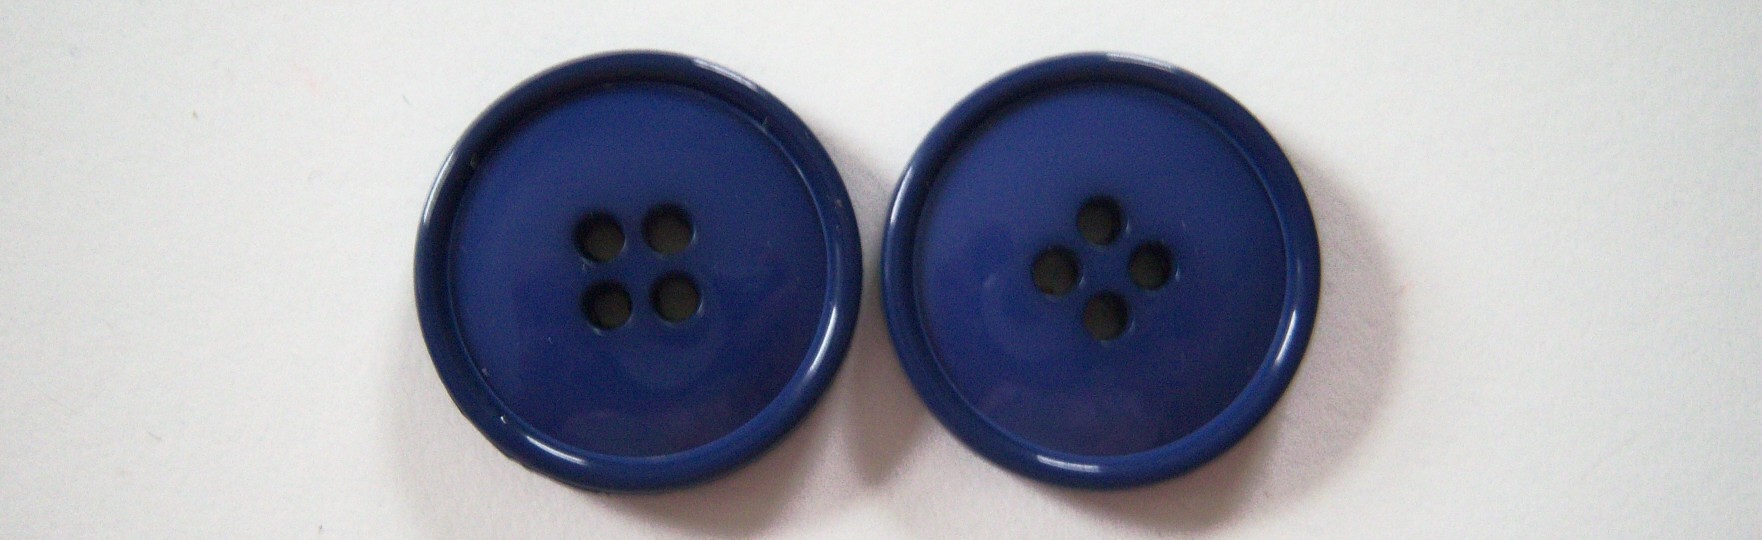 Shiny Admiral 1" 2 Hole Button